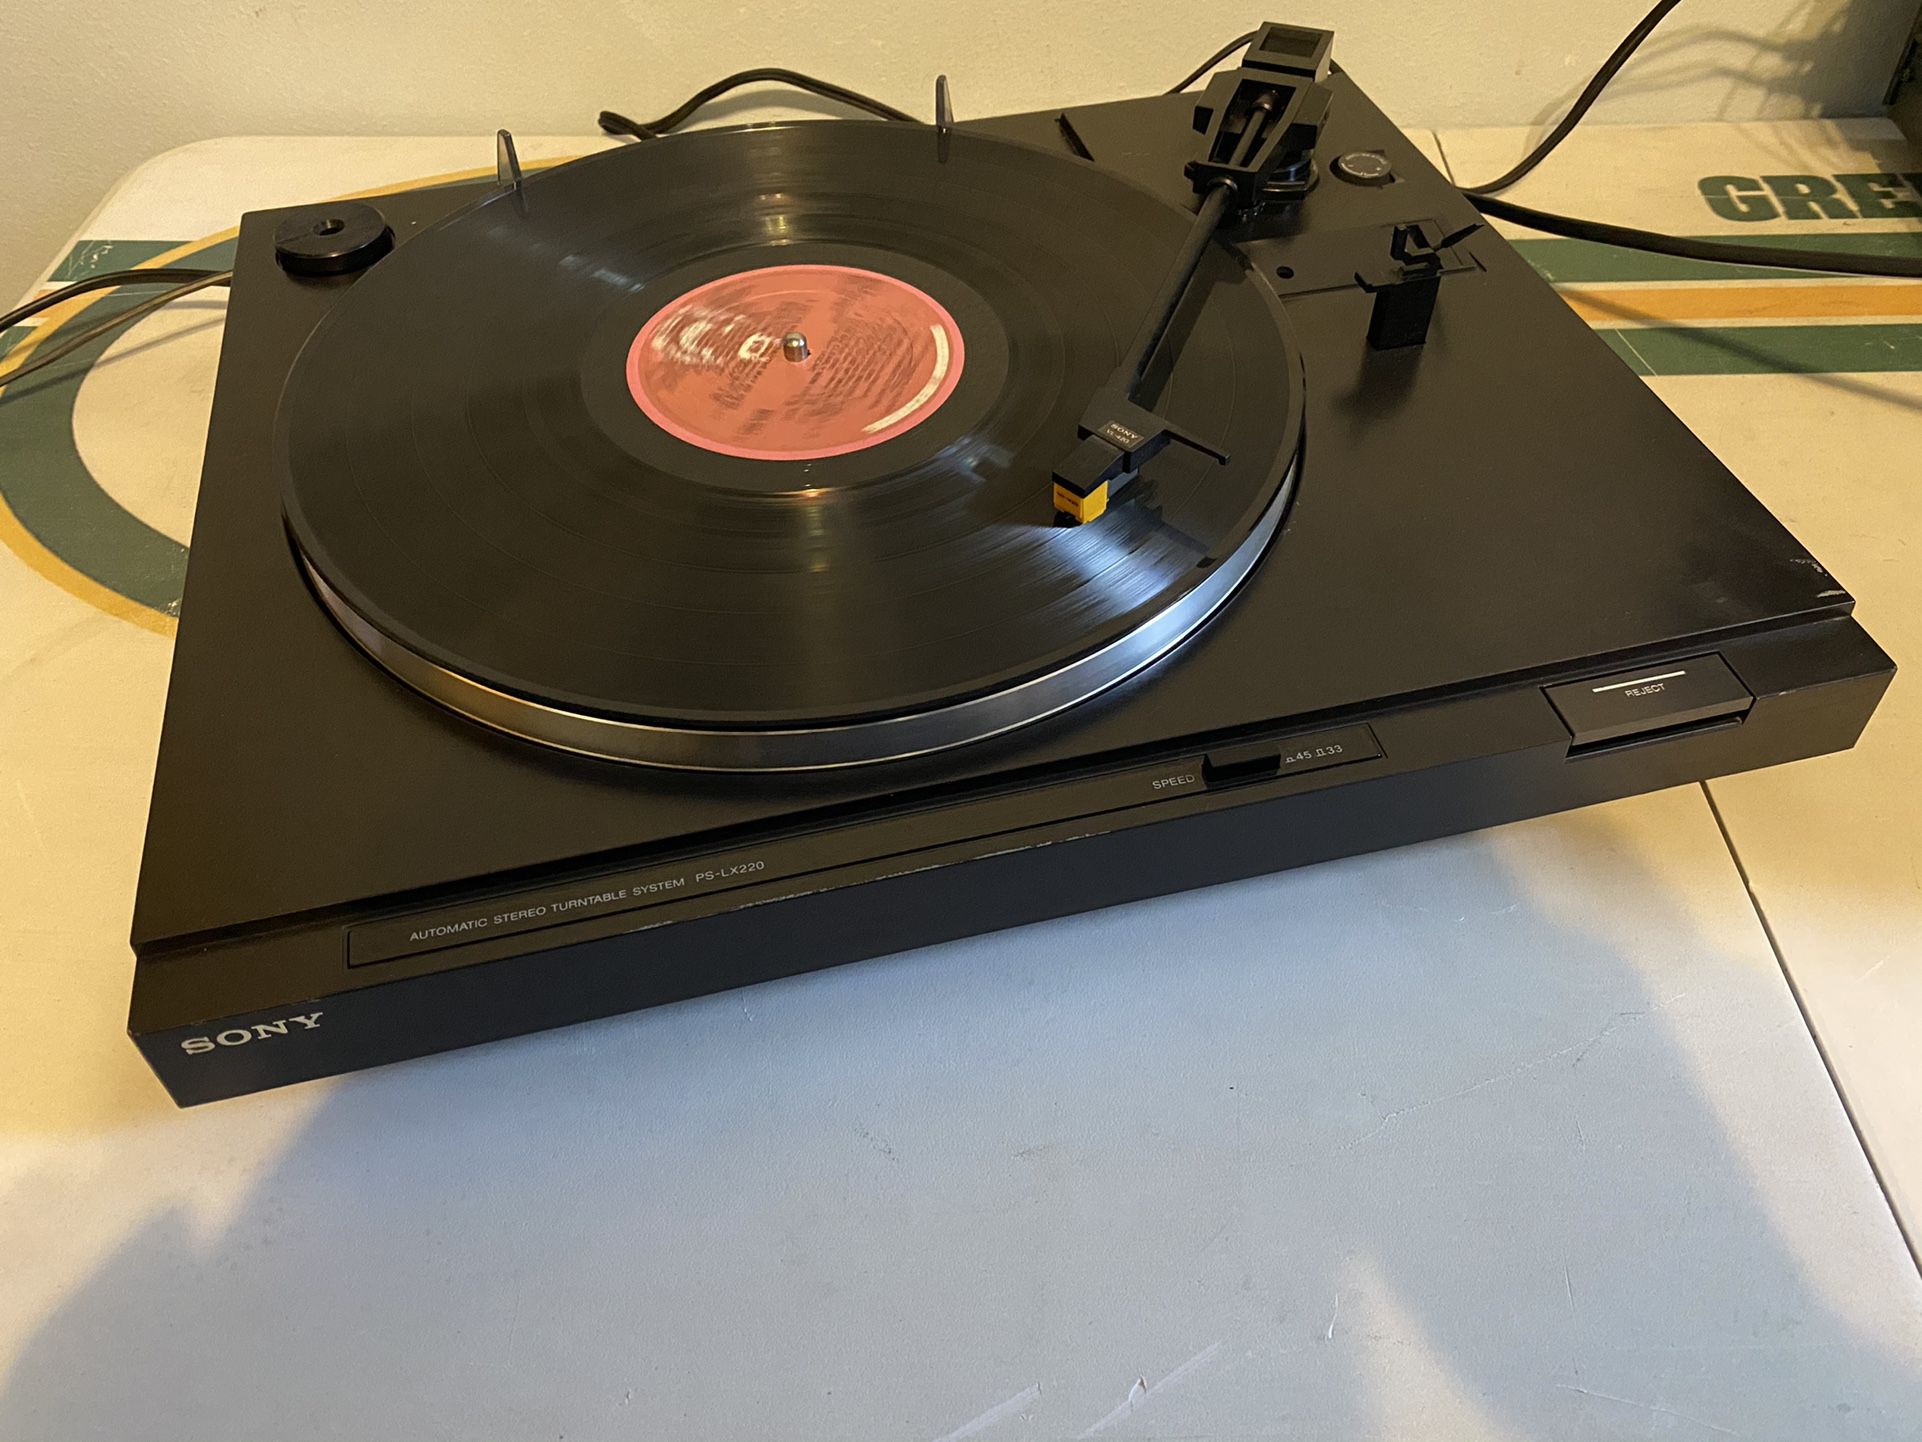 Sony PS LX220 Automatic Stereo Turntable System.